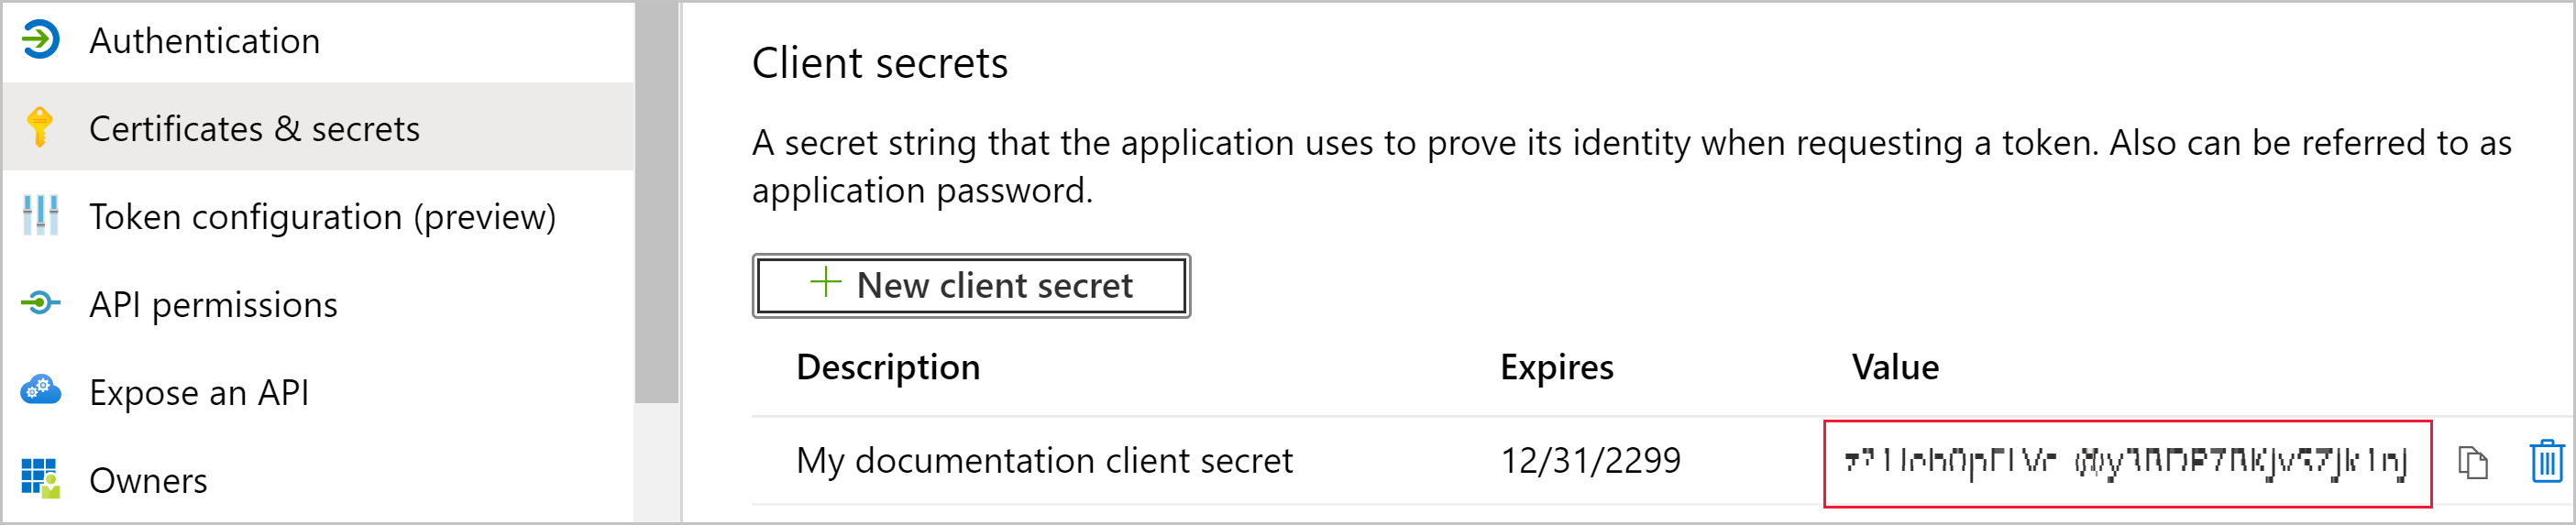 Screenshot of the Certificates & secrets page for the app. Under Client secrets, a new secret is visible. Its indecipherable value is highlighted.